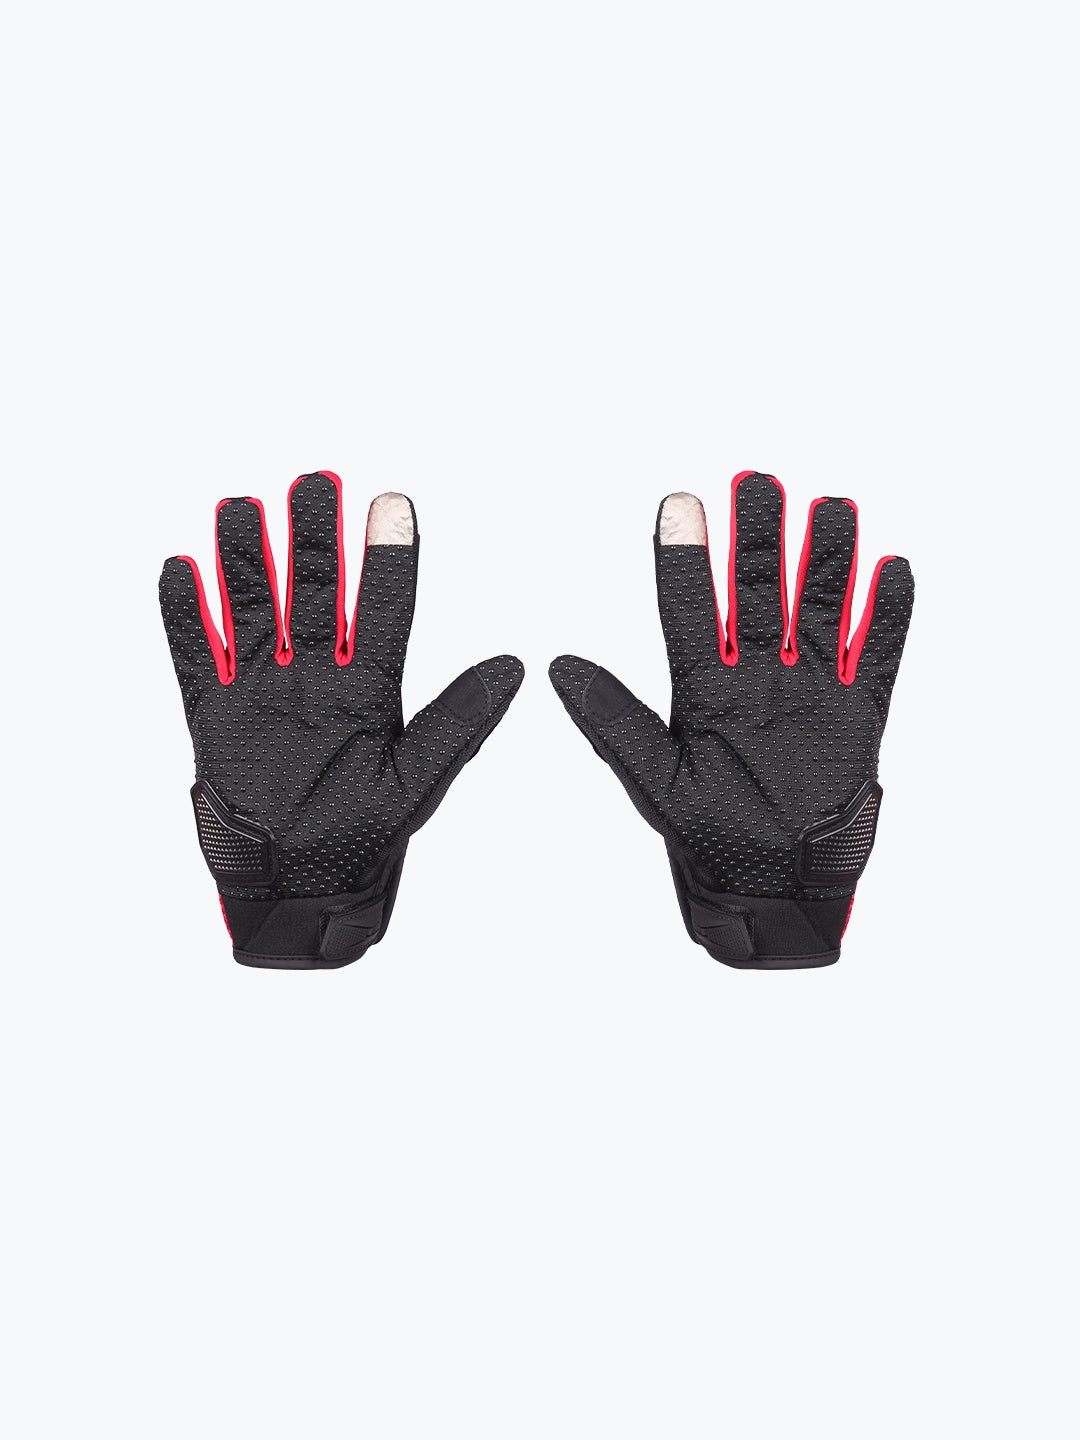 Race Car Tribe Gloves Economy Red